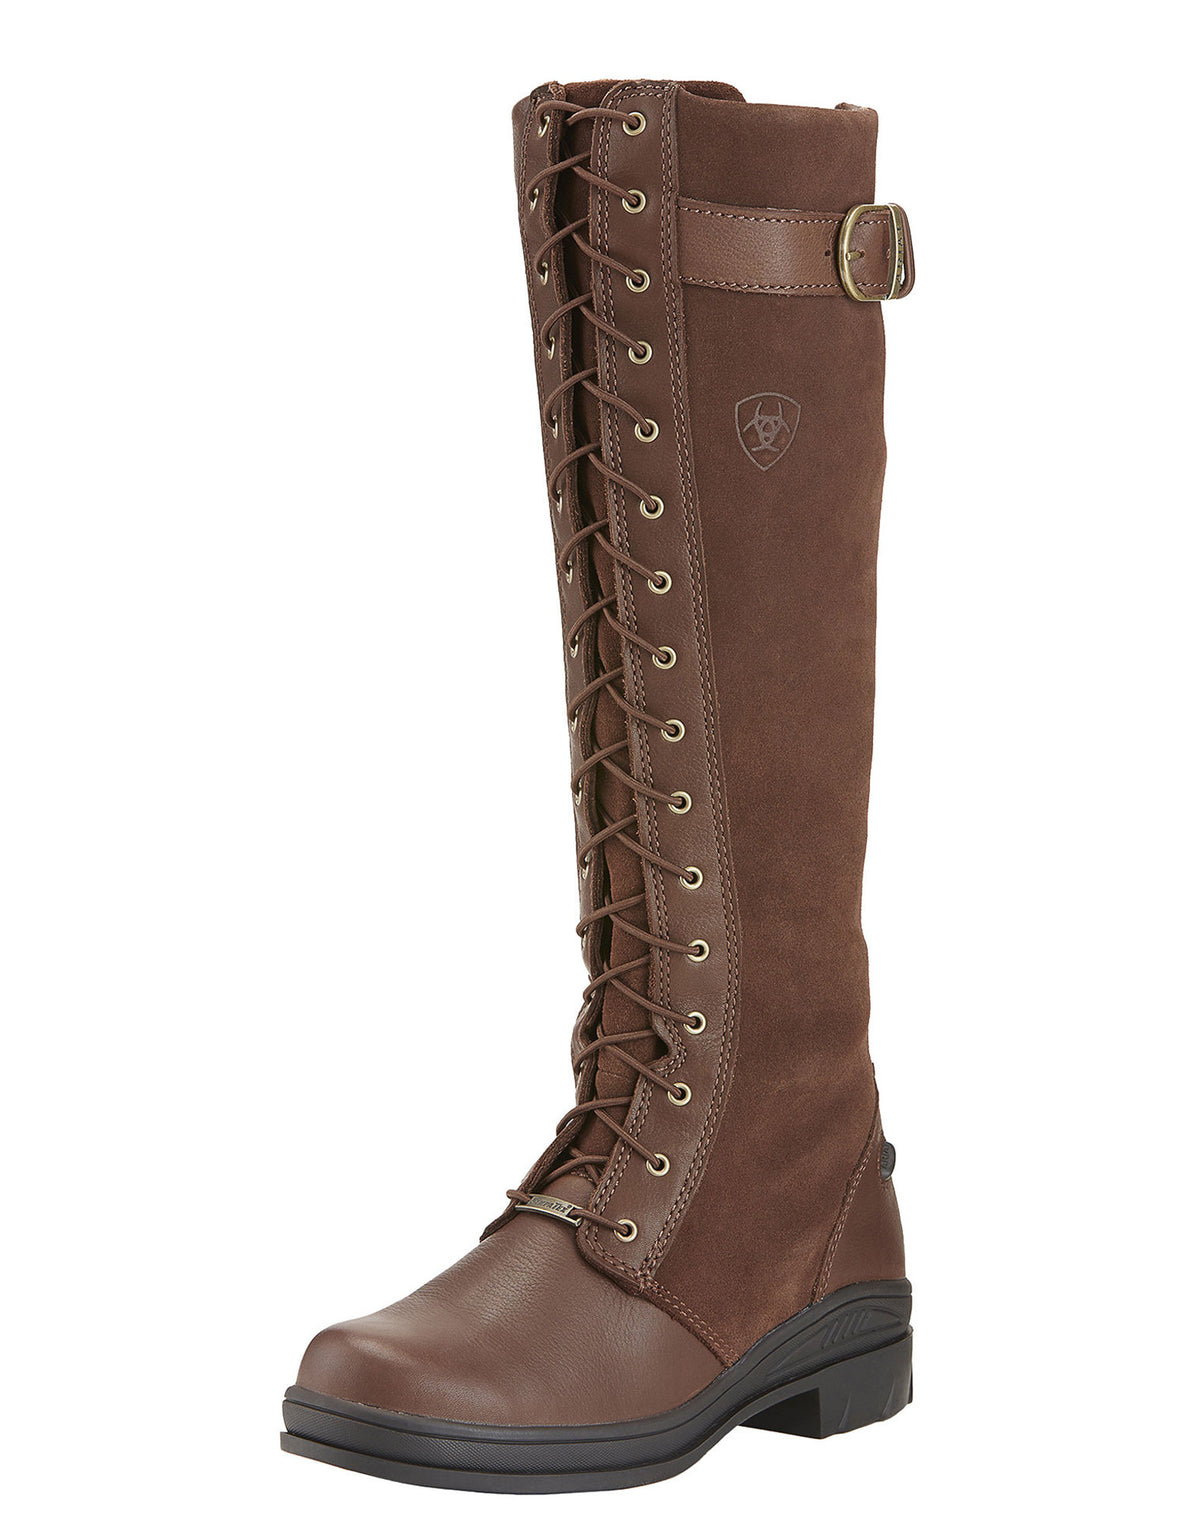 Chocolate Ariat Coniston Waterproof Insulated Boots